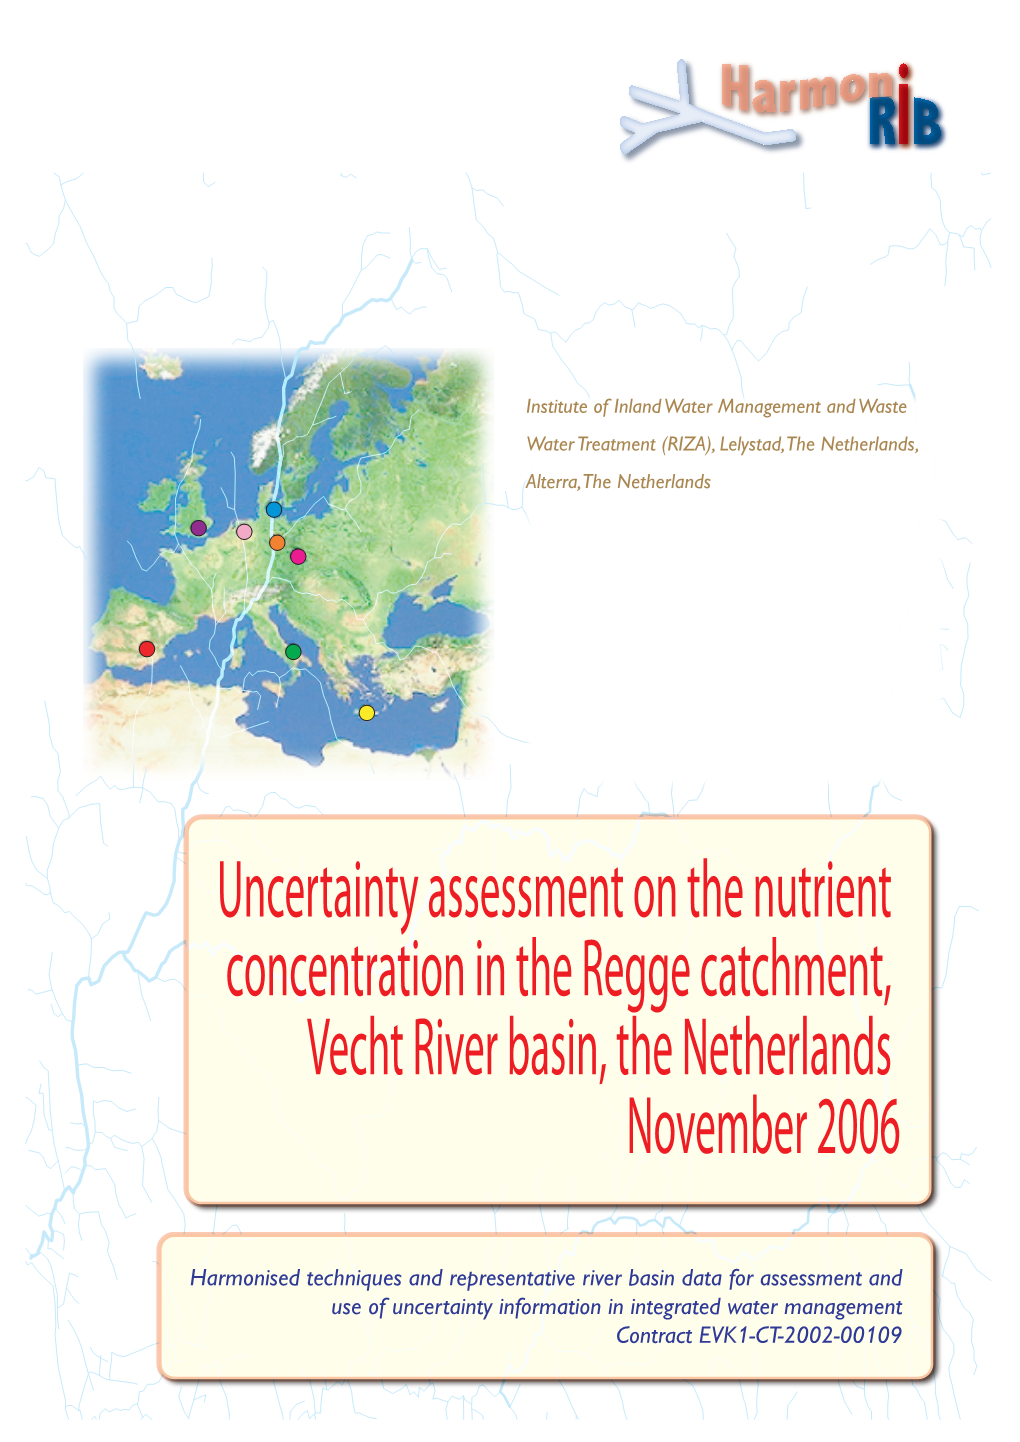 Uncertainty Assessment on the Nutrient Concentration in the Regge Catchment, Vecht River Basin, the Netherlands November 2006